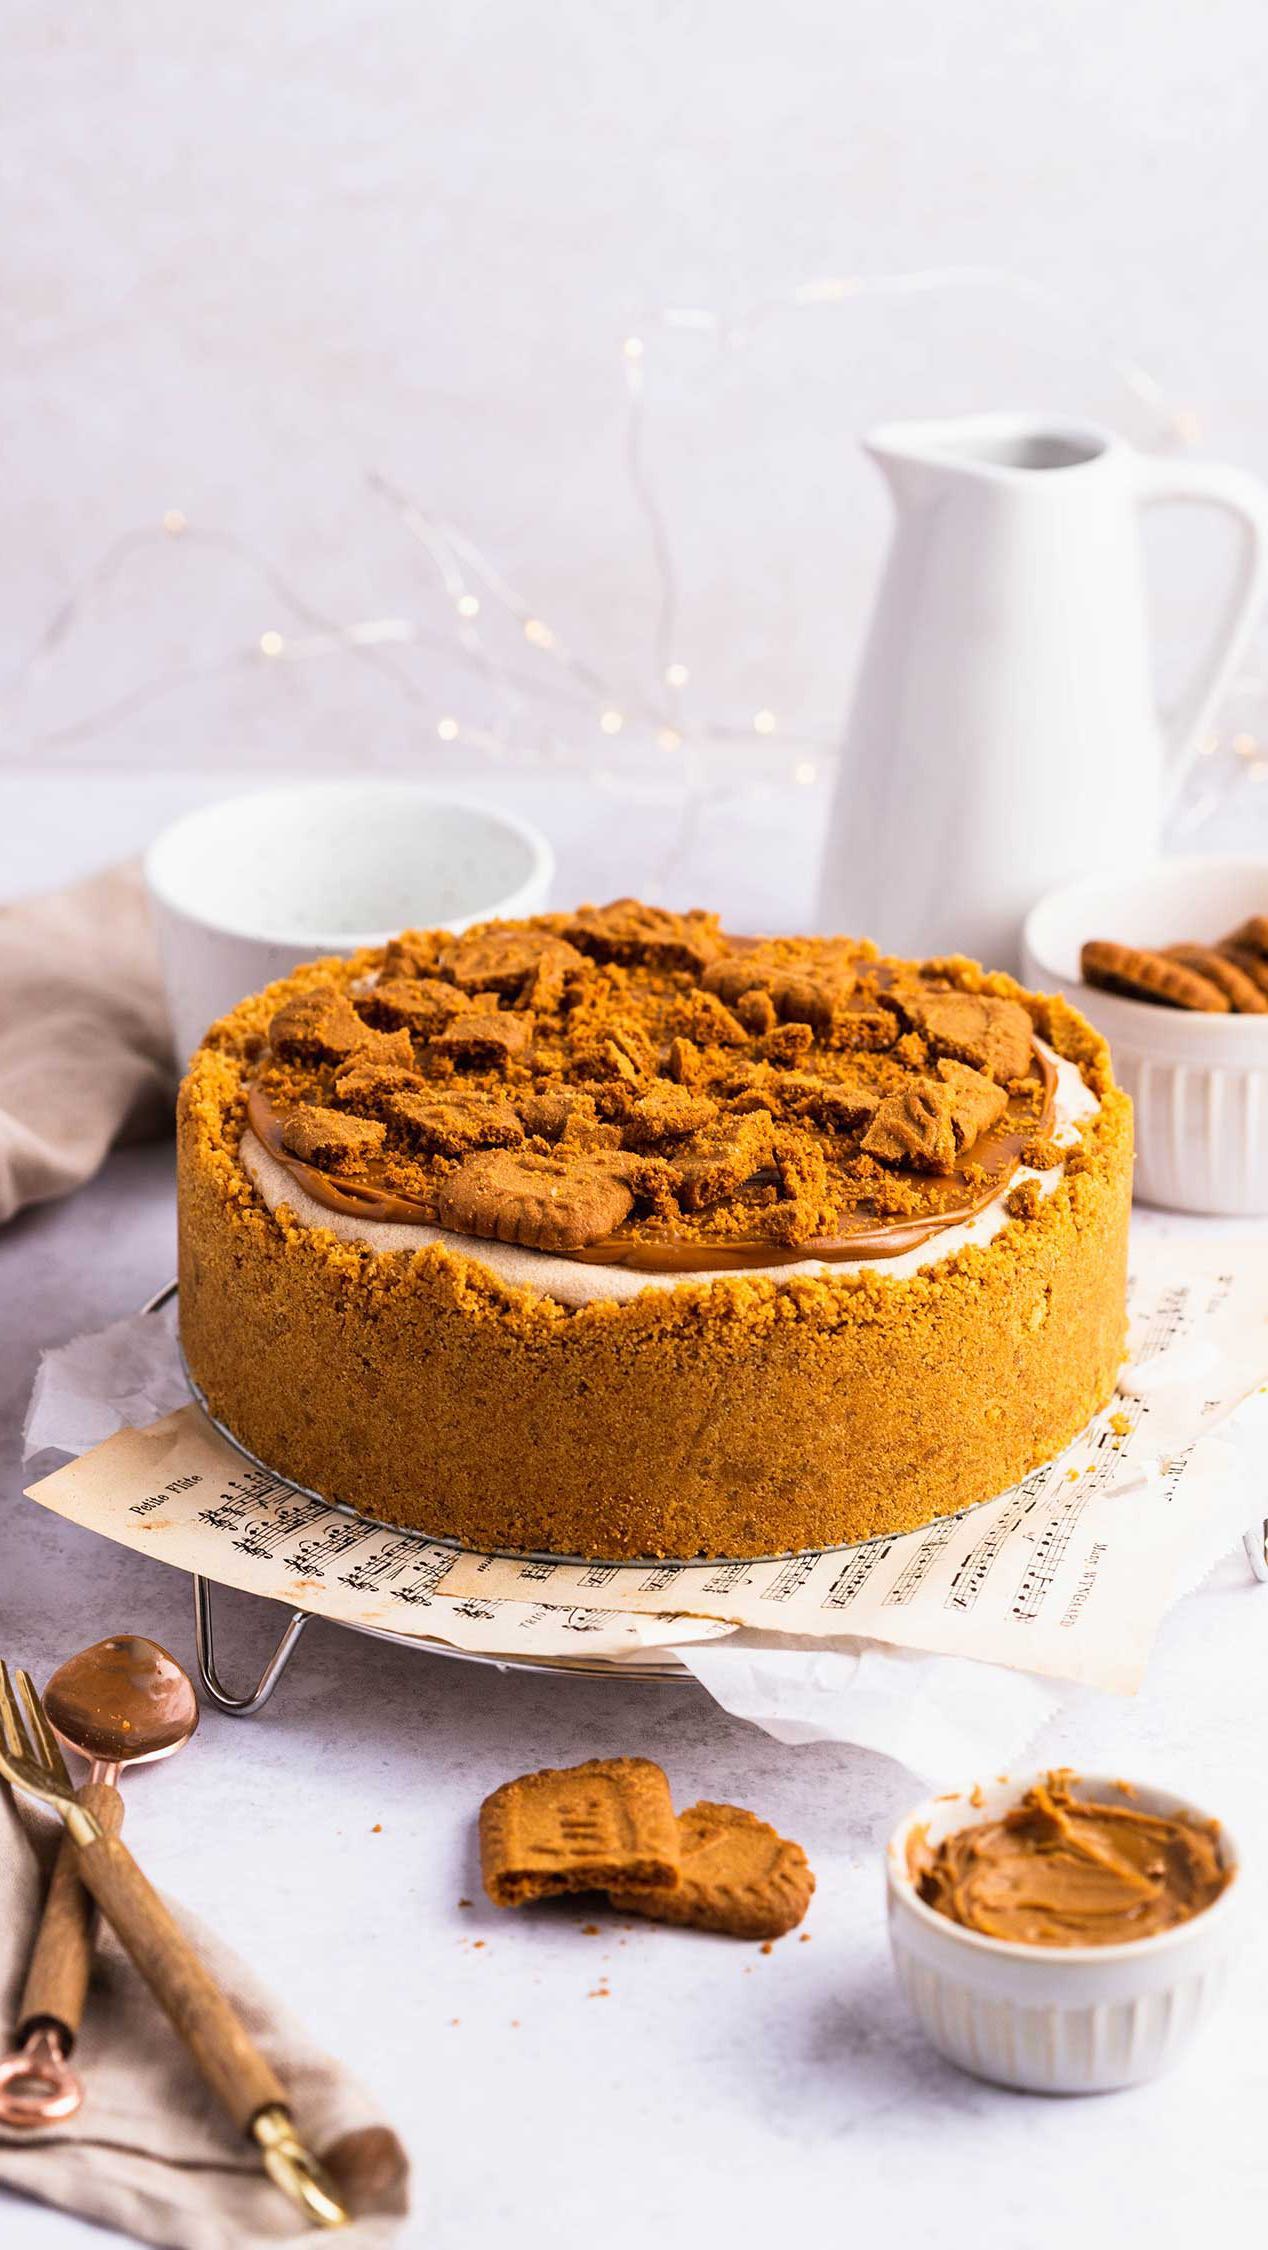 This biscoff cheesecake is one of the most popular recipes among my friends and family! It’s super easy to make, creamy, rich, and so delicious. If you like bisoff and cheesecake you’ll love it🥰 Find the recipe on the website!

https://thechestnutbakery.com/biscoff-cheesecake-easy-vegan
Or search “biscoff cheesecake” in the search bar on the website!

Wishing you all a lovely Wednesday!
:
:
:
:
:
#biscoffcheesecake #cheesecake #vegancheesecake #nobakedesserts #nobakecheesecake #nobake #veganbiscoffcheesecake #veganfood  #sustainalbelife #baking #vegan #healthylifestyle #veganbaking #foodphotography #crueltyfree #veganrecipe #veganlife #plantbased # #サスティナブル #ヴィーガン #デザート #ベーキング #ヴィーガン #ビーガンレシピ #ビーガンスイーツ #プラントベース